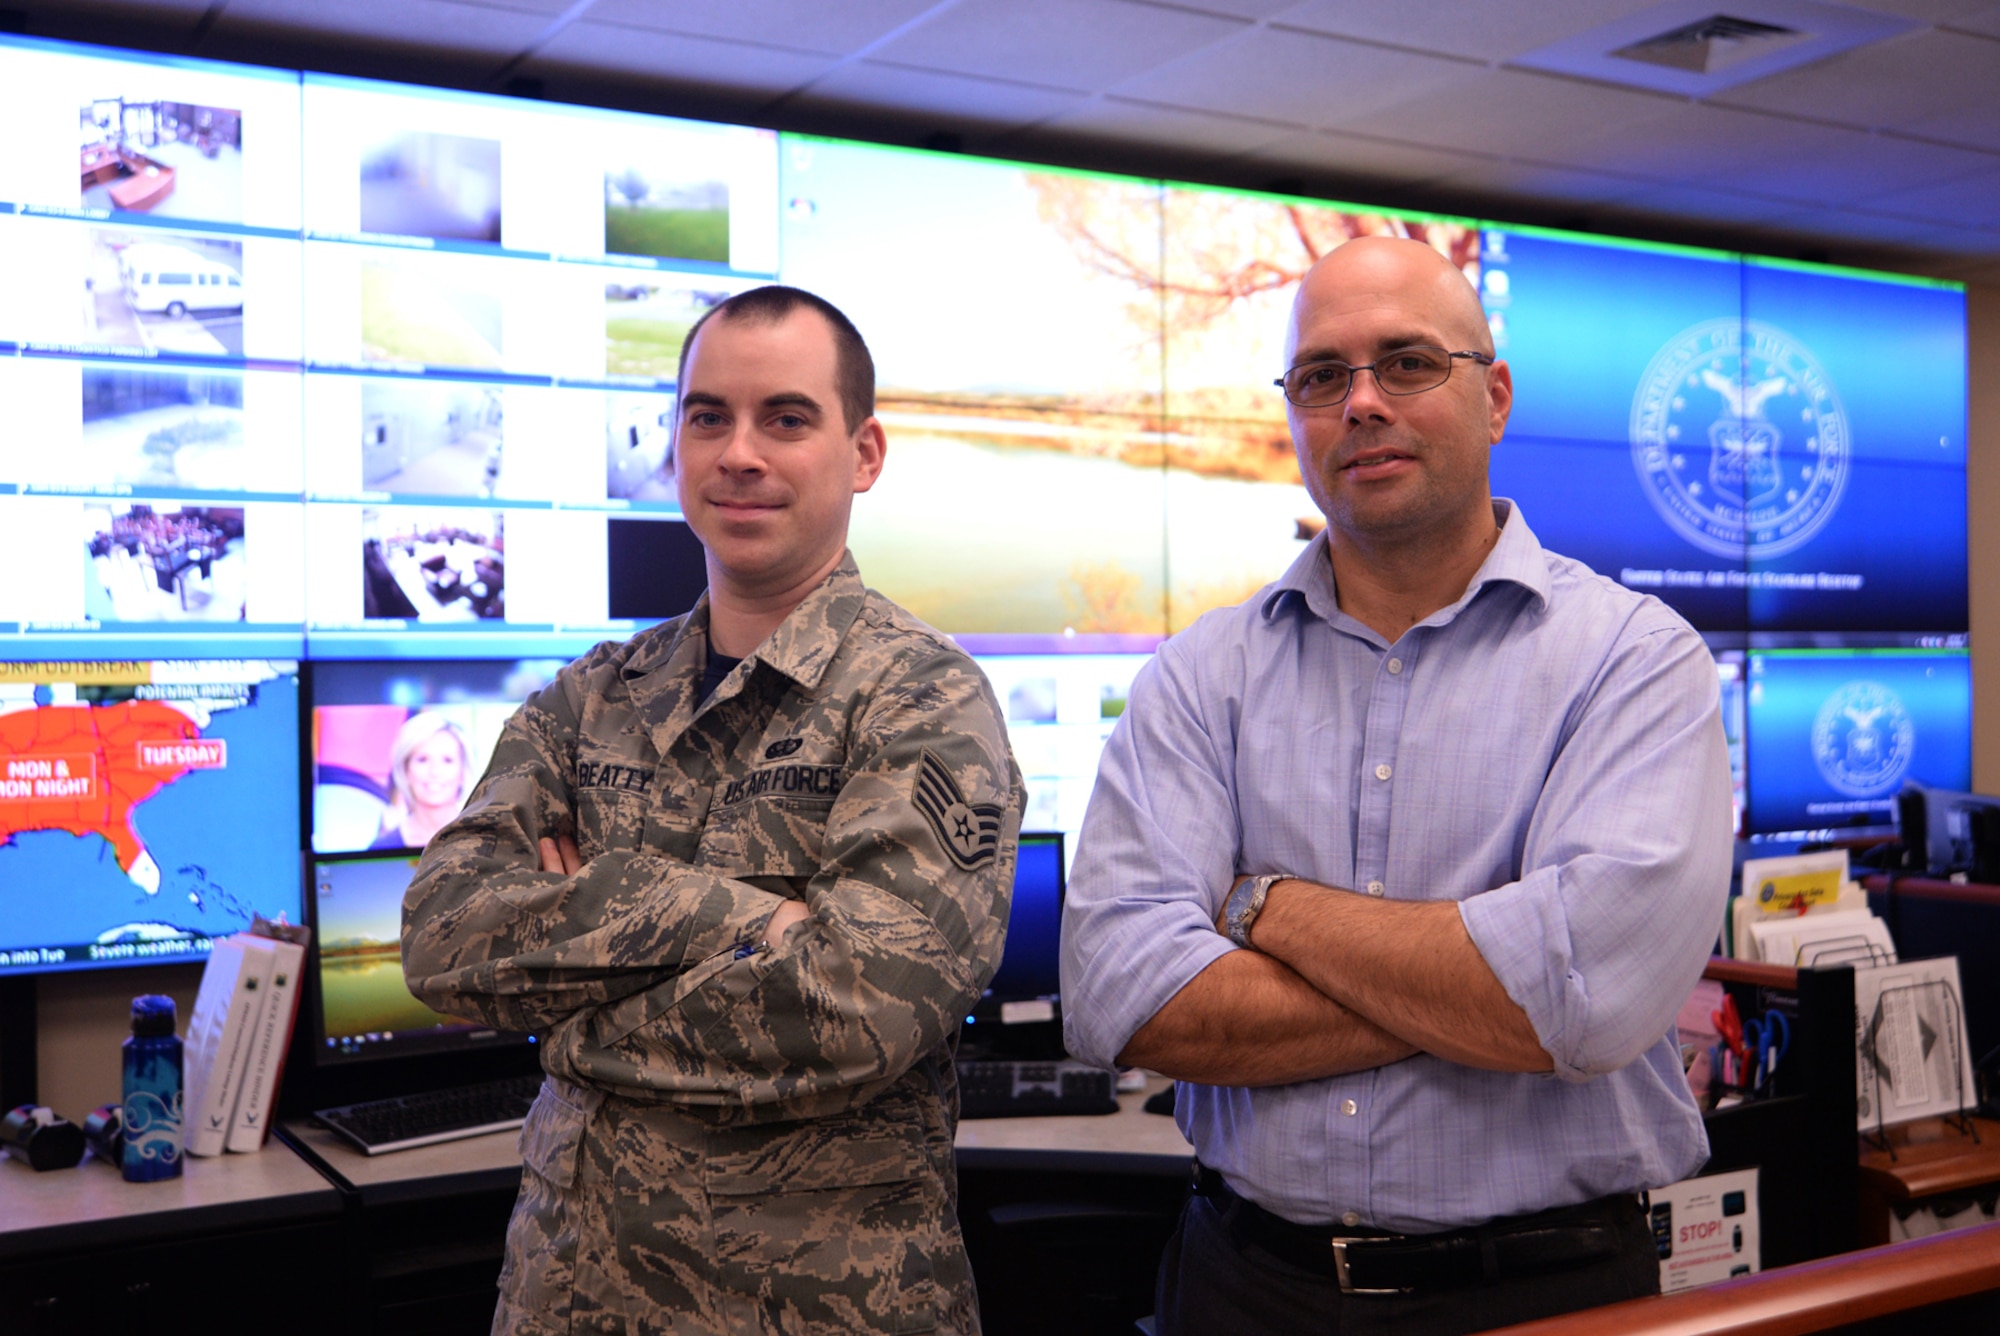 Controllers Staff Sgt. Jordan Beatty and Brent Blankenship, Air Force Mortuary Affairs Operations Command, Control and Communication, pose in the mortuary’s operations center Oct. 10, 2014.  Beatty is deployed from the 87th Force Support Squadron, Joint Base McGuire-Dix-Lakehurst, N.J., and Blankenship has worked in C3 as a civilian since 2009. (U.S. Air Force photo/Tech. Sgt. Myco Apat) 